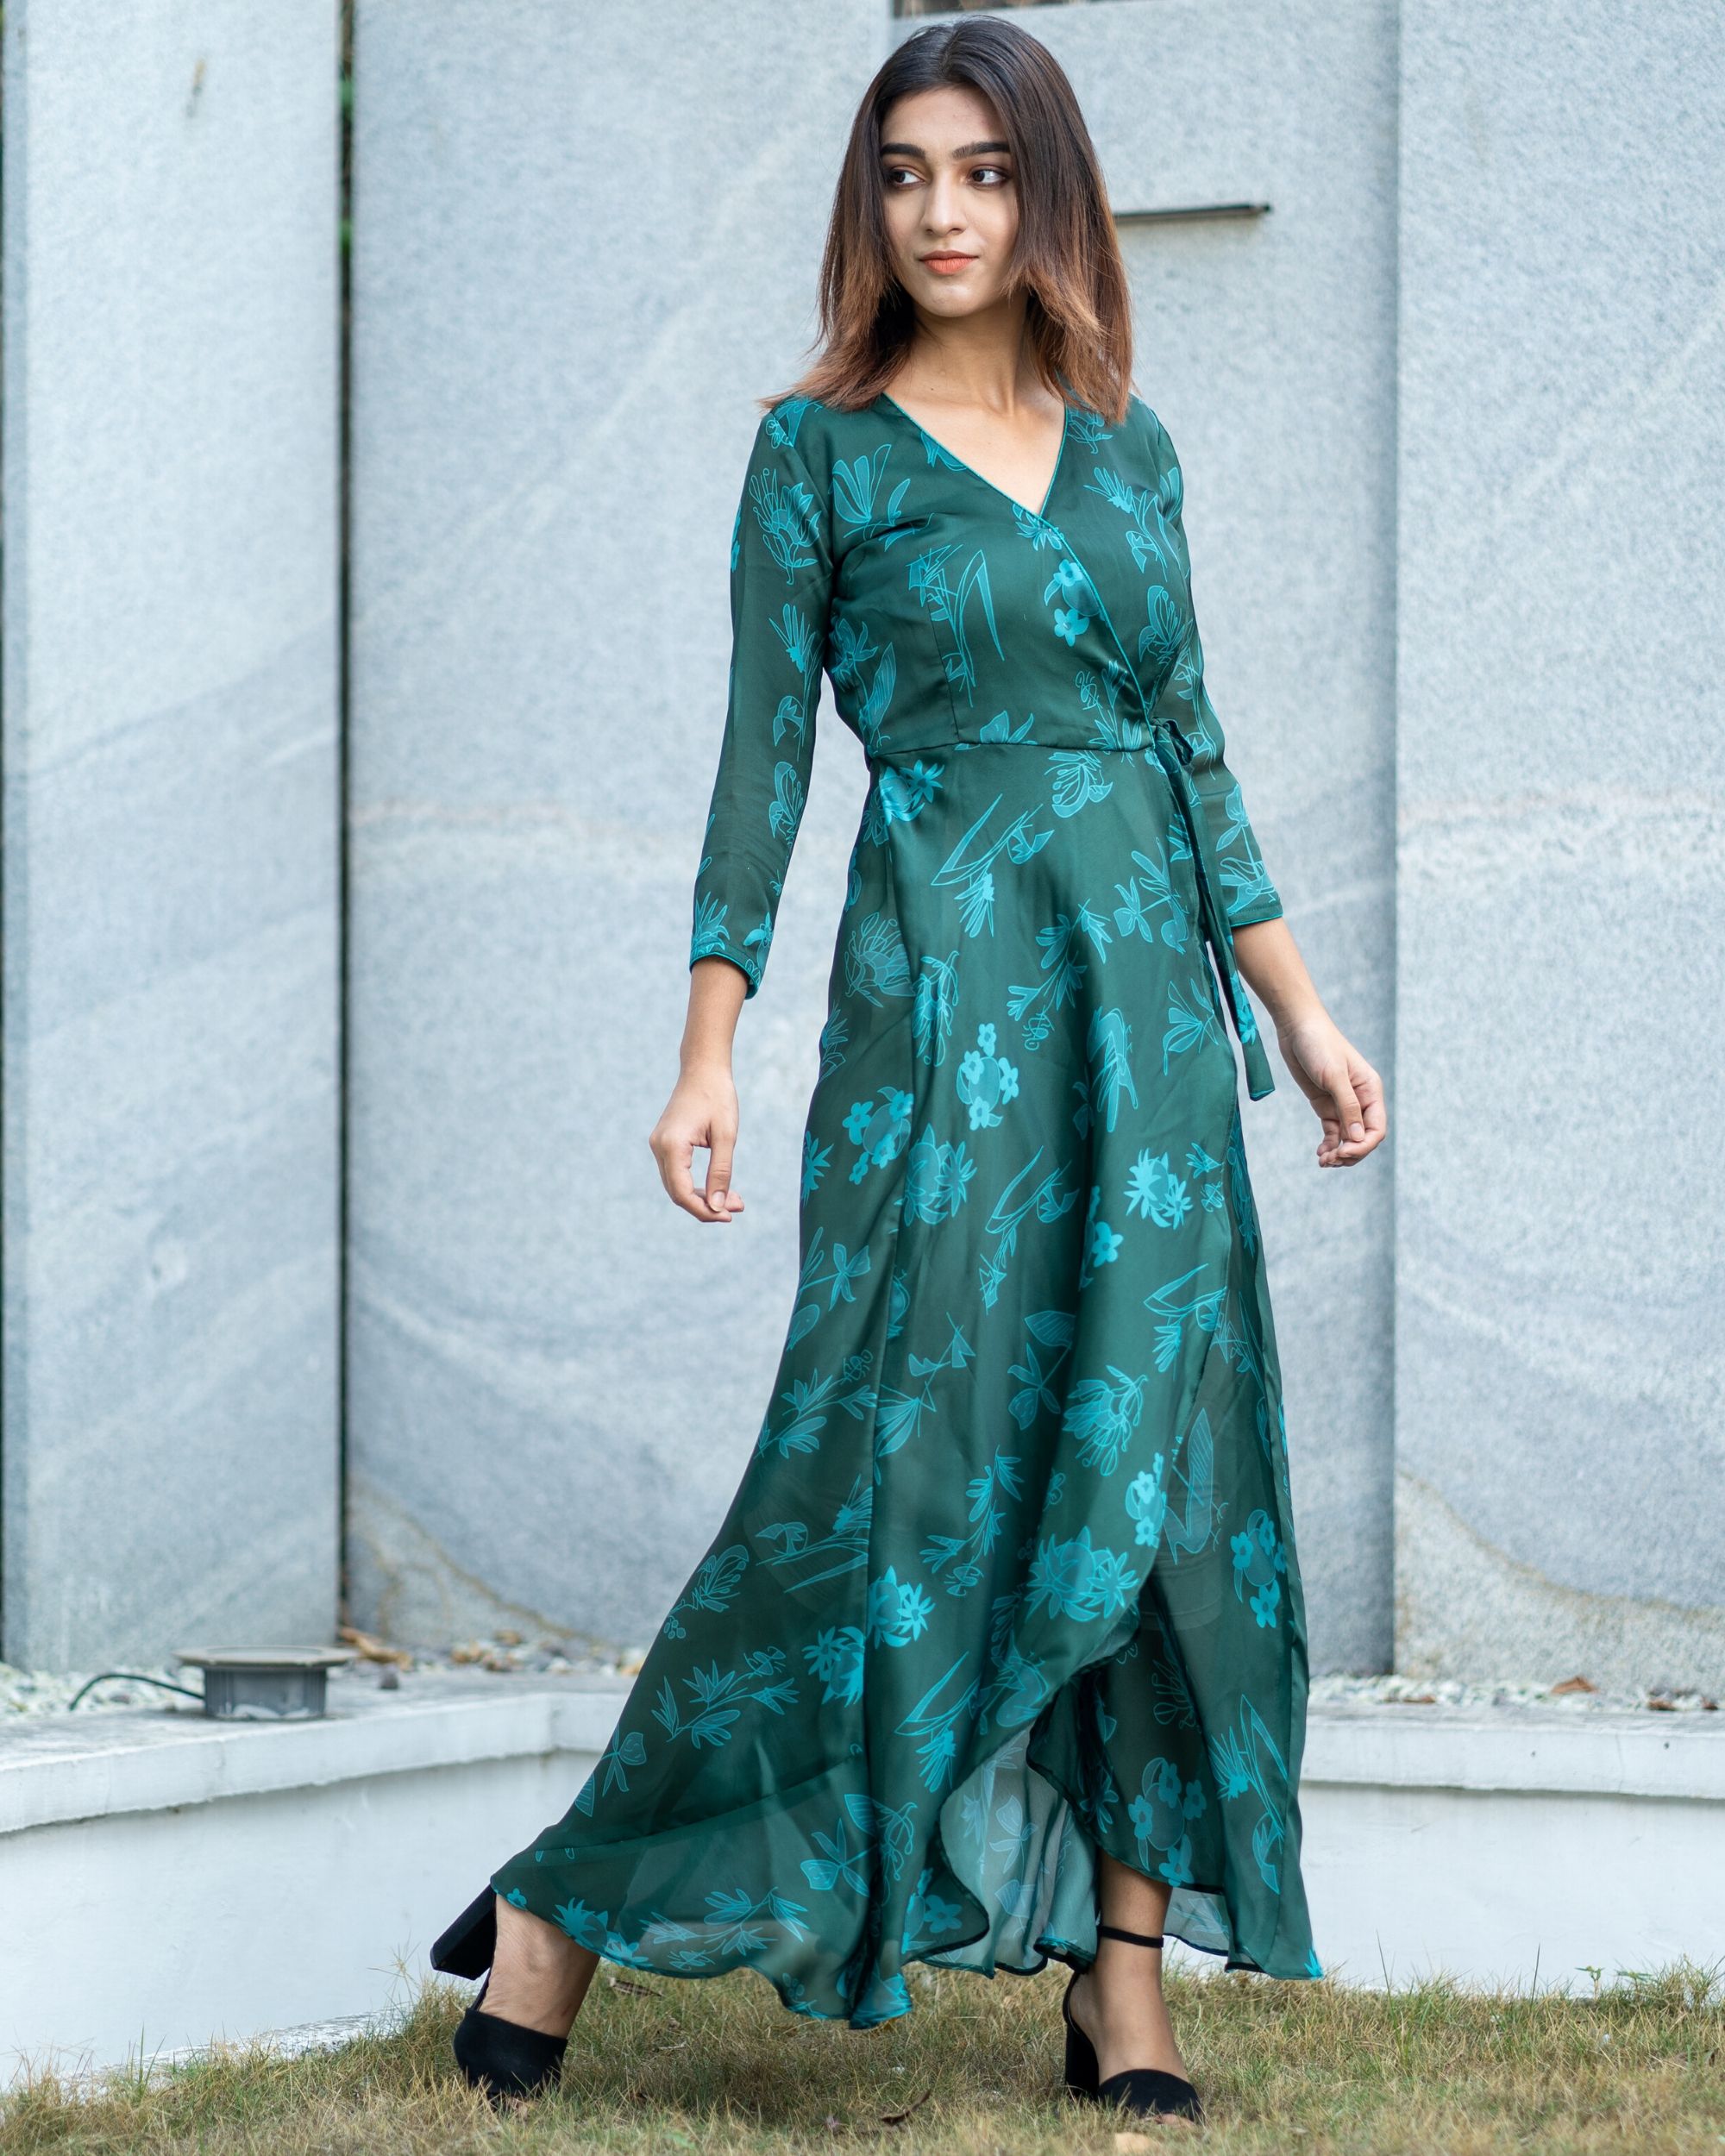 Bottle green printed wrap dress by The Weave Story | The Secret Label